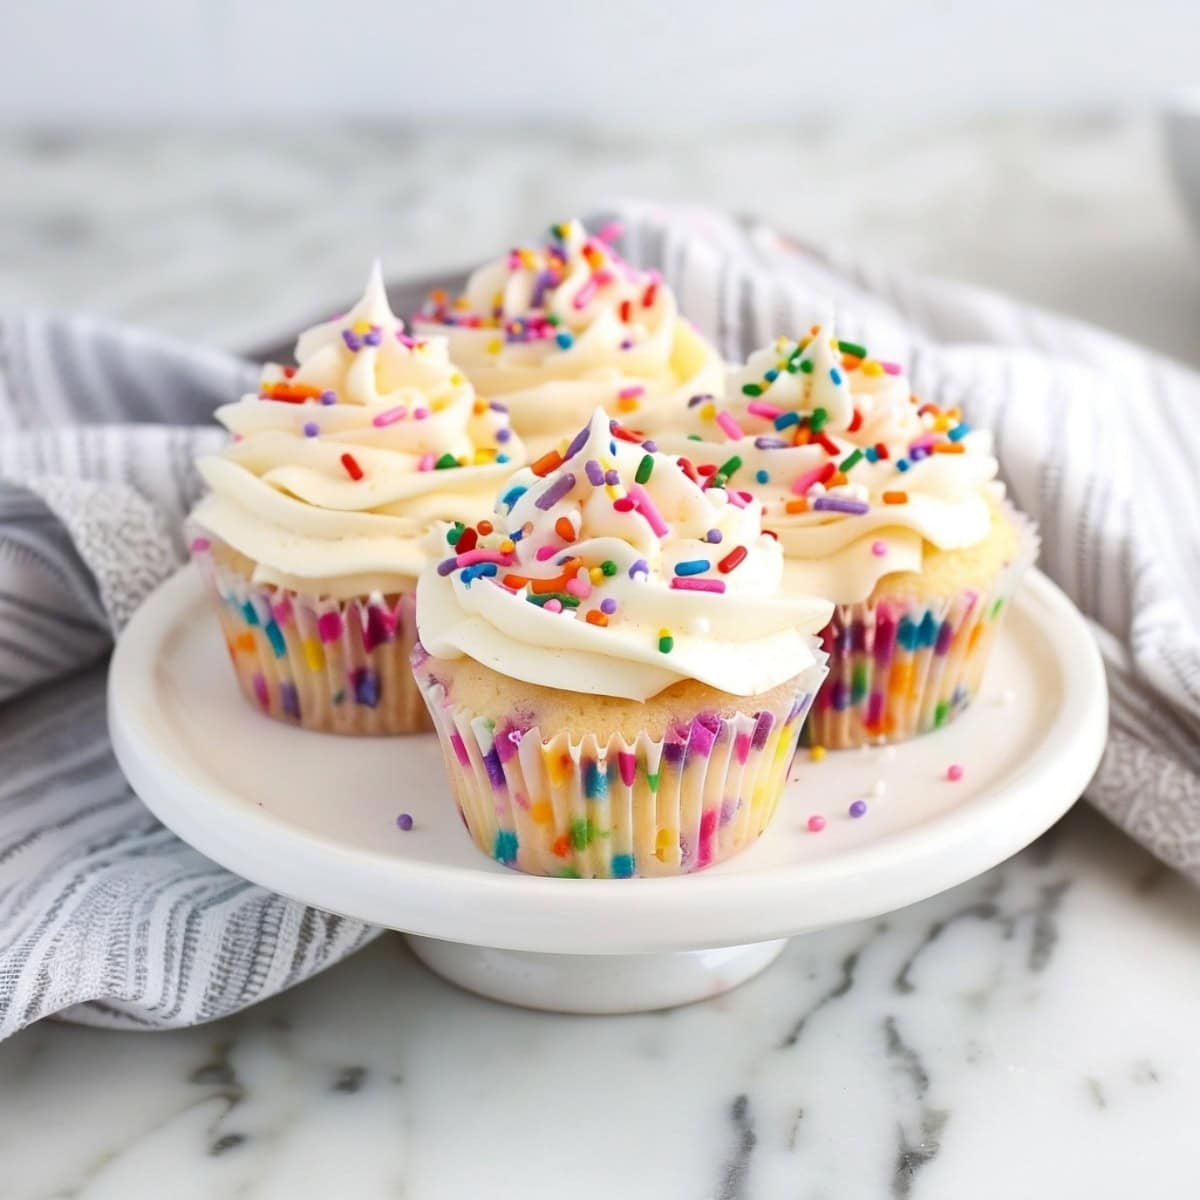 Flavorful funfetti cupcakes, packed with fun, colorful sprinkles and finished with a smooth buttercream.